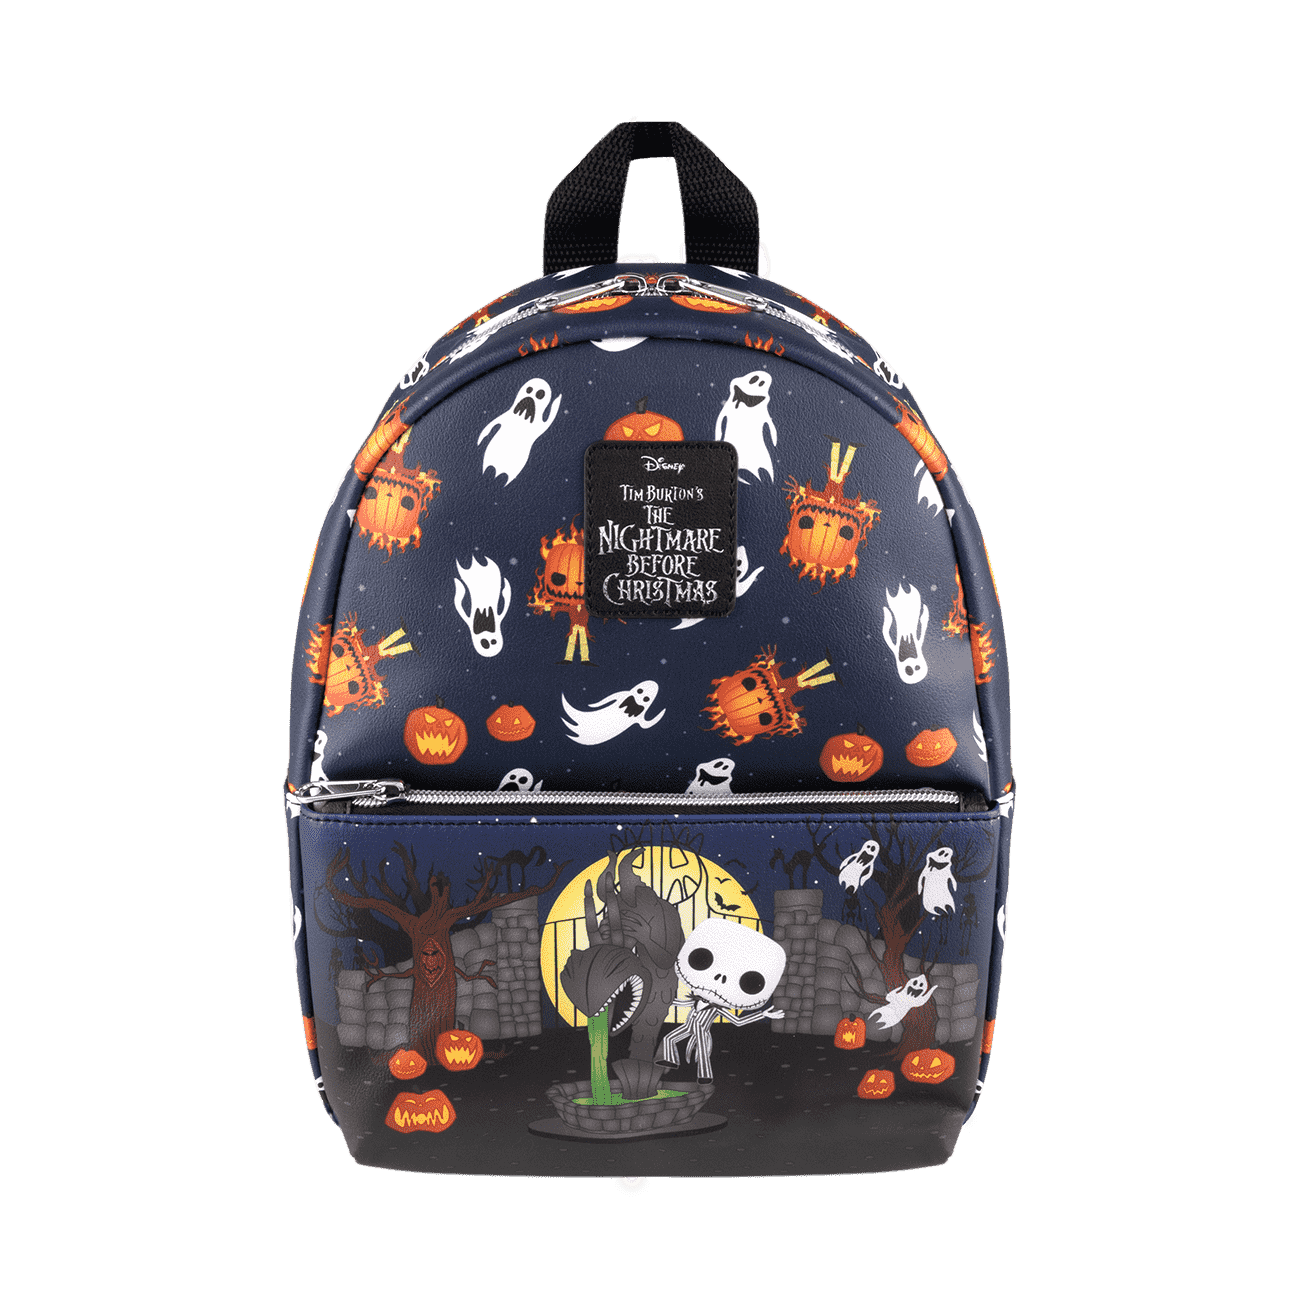 Buy The Nightmare Before Christmas Mini Backpack at Funko.